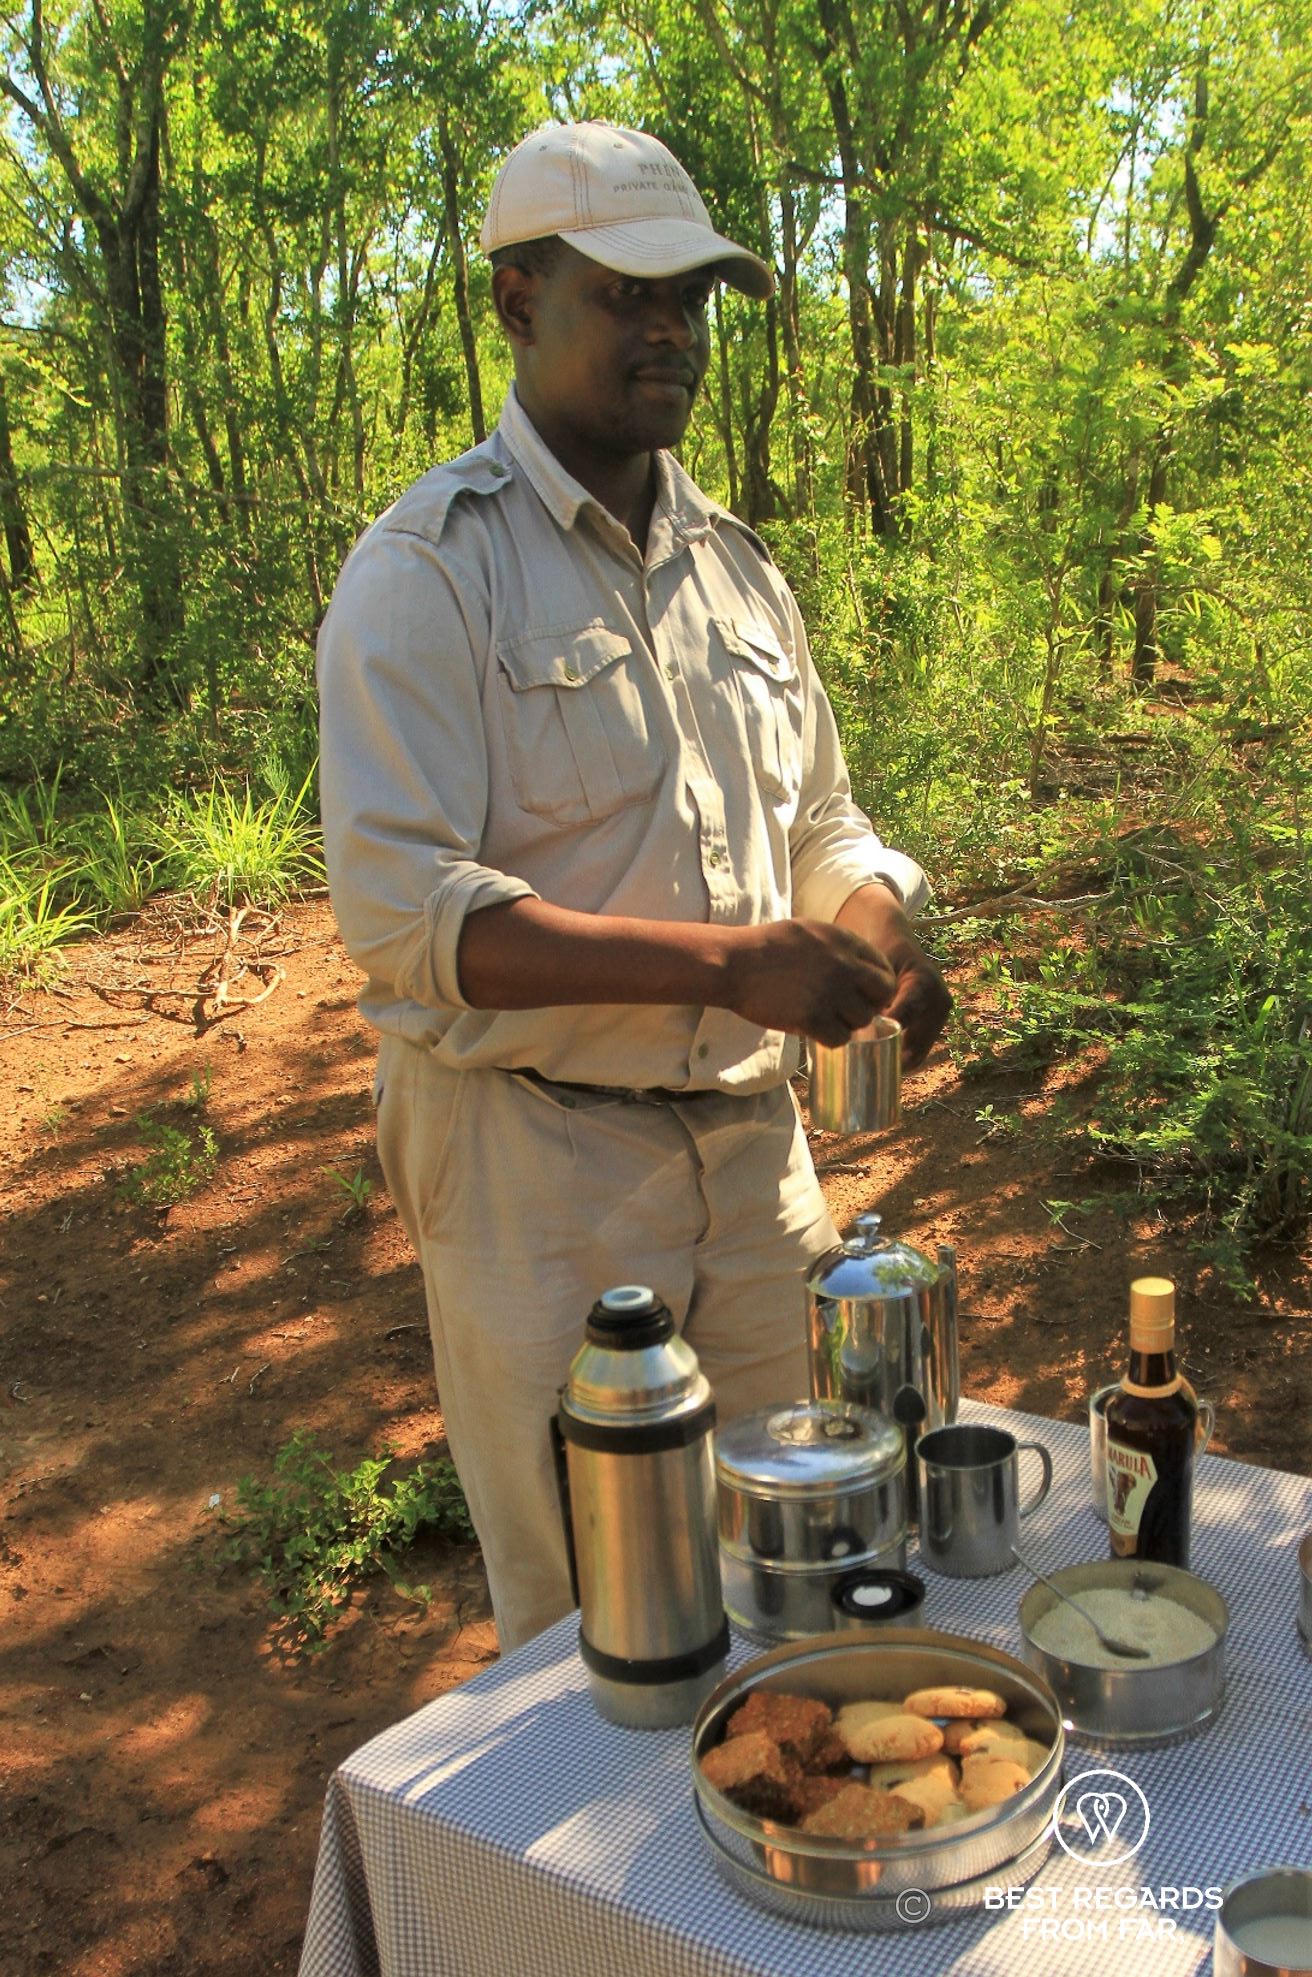 Ranger in khaki uniform and cap preparing drinks at a table with cookies in the bush.